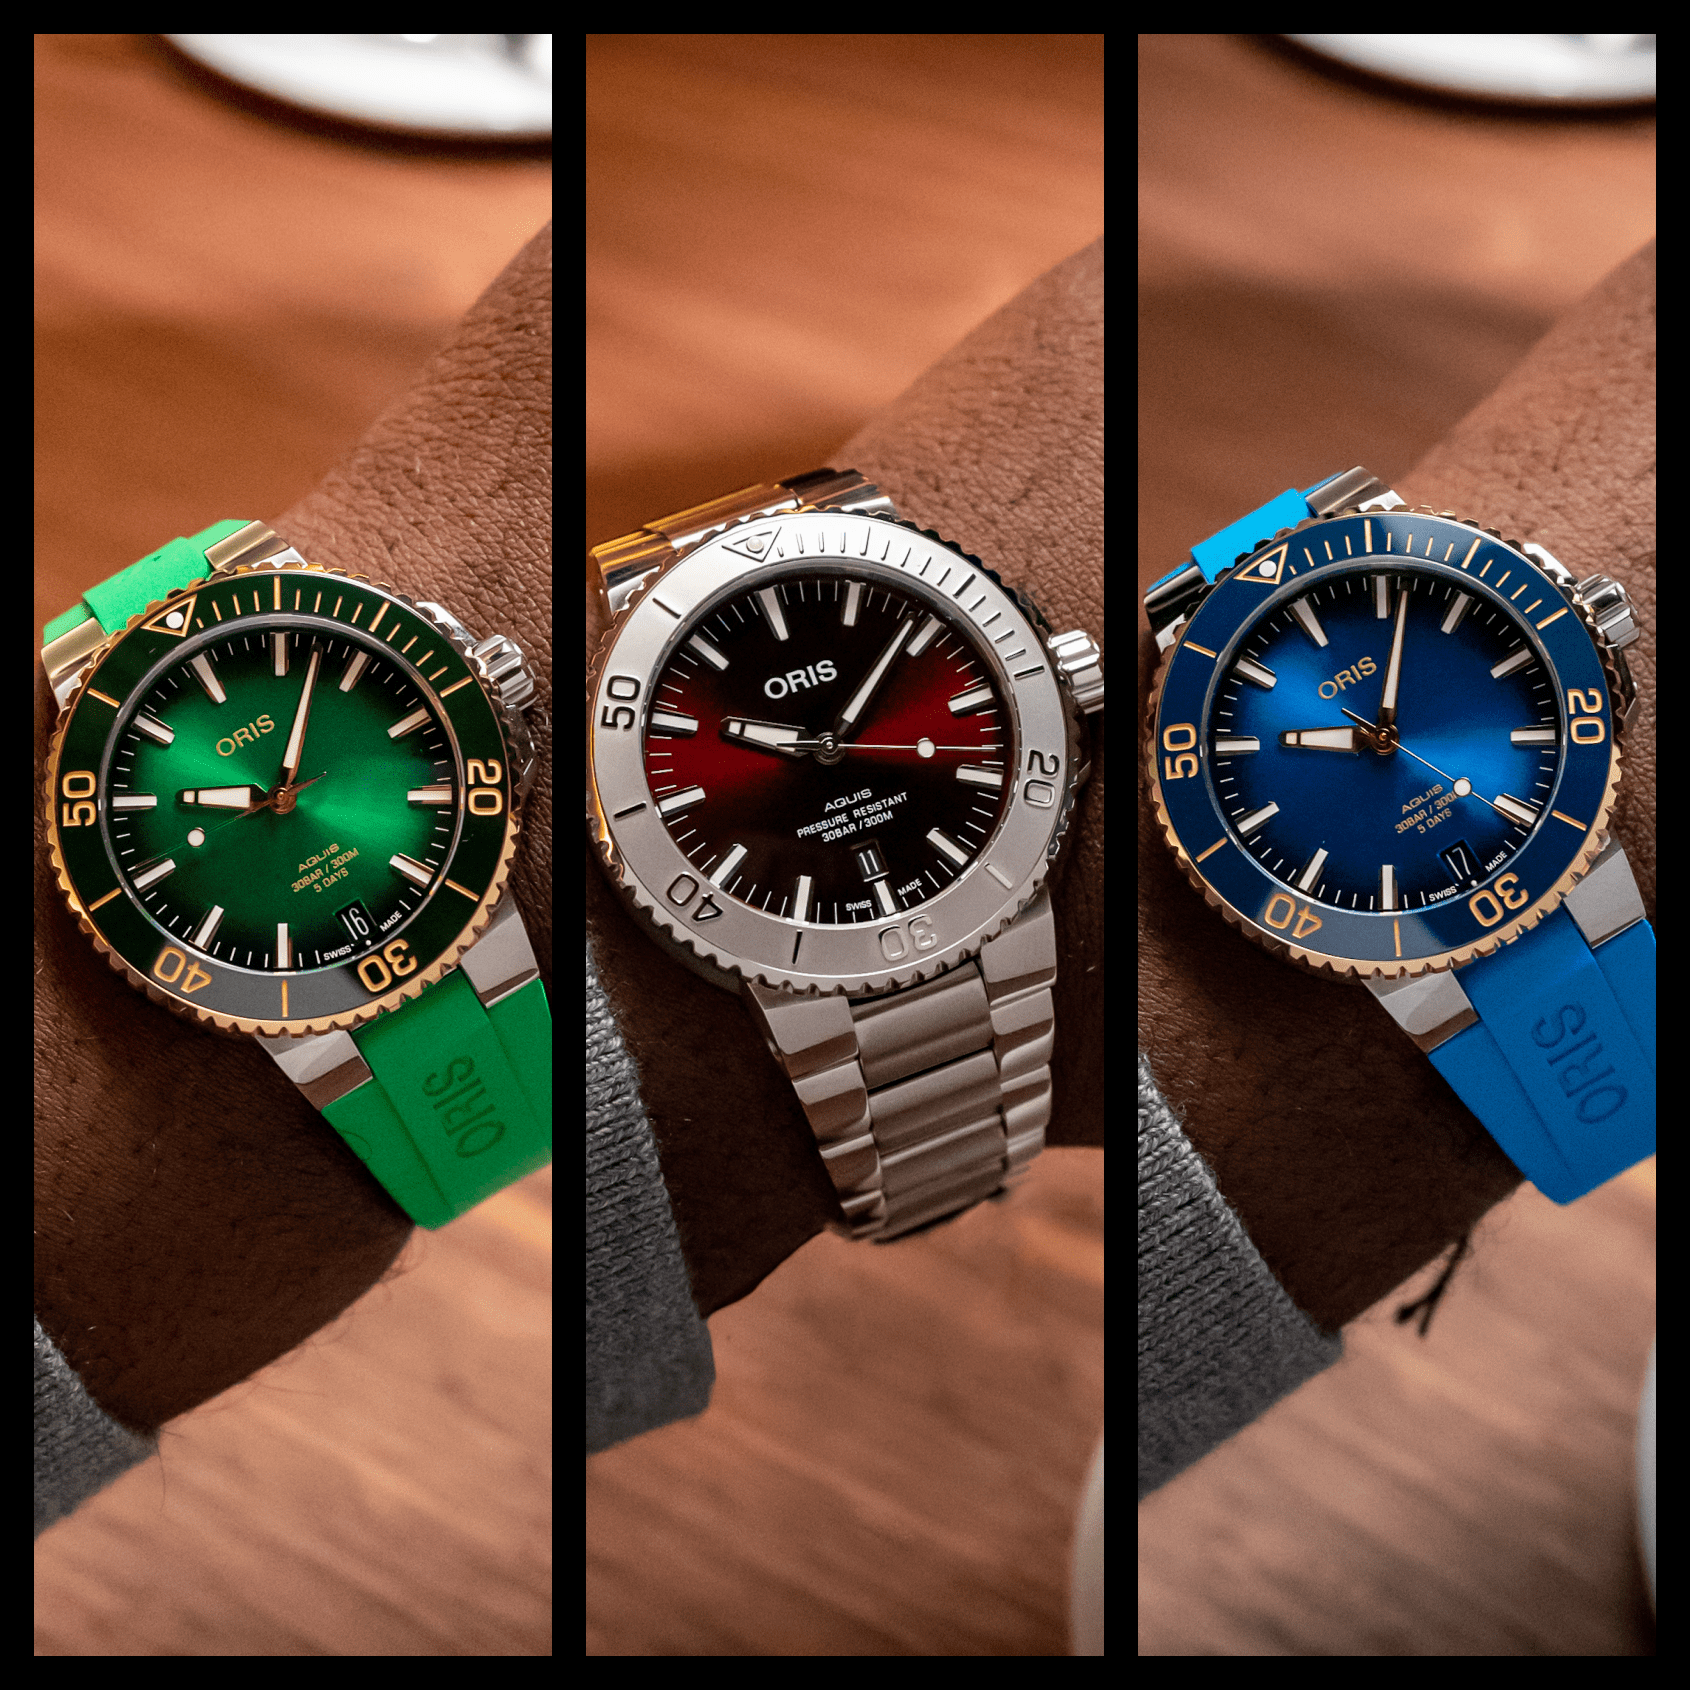 INTRODUCING: Oris launches its largest cherry Aquis yet alongside a duo of subtly two-toned calibre 400 driven divers (live shots)